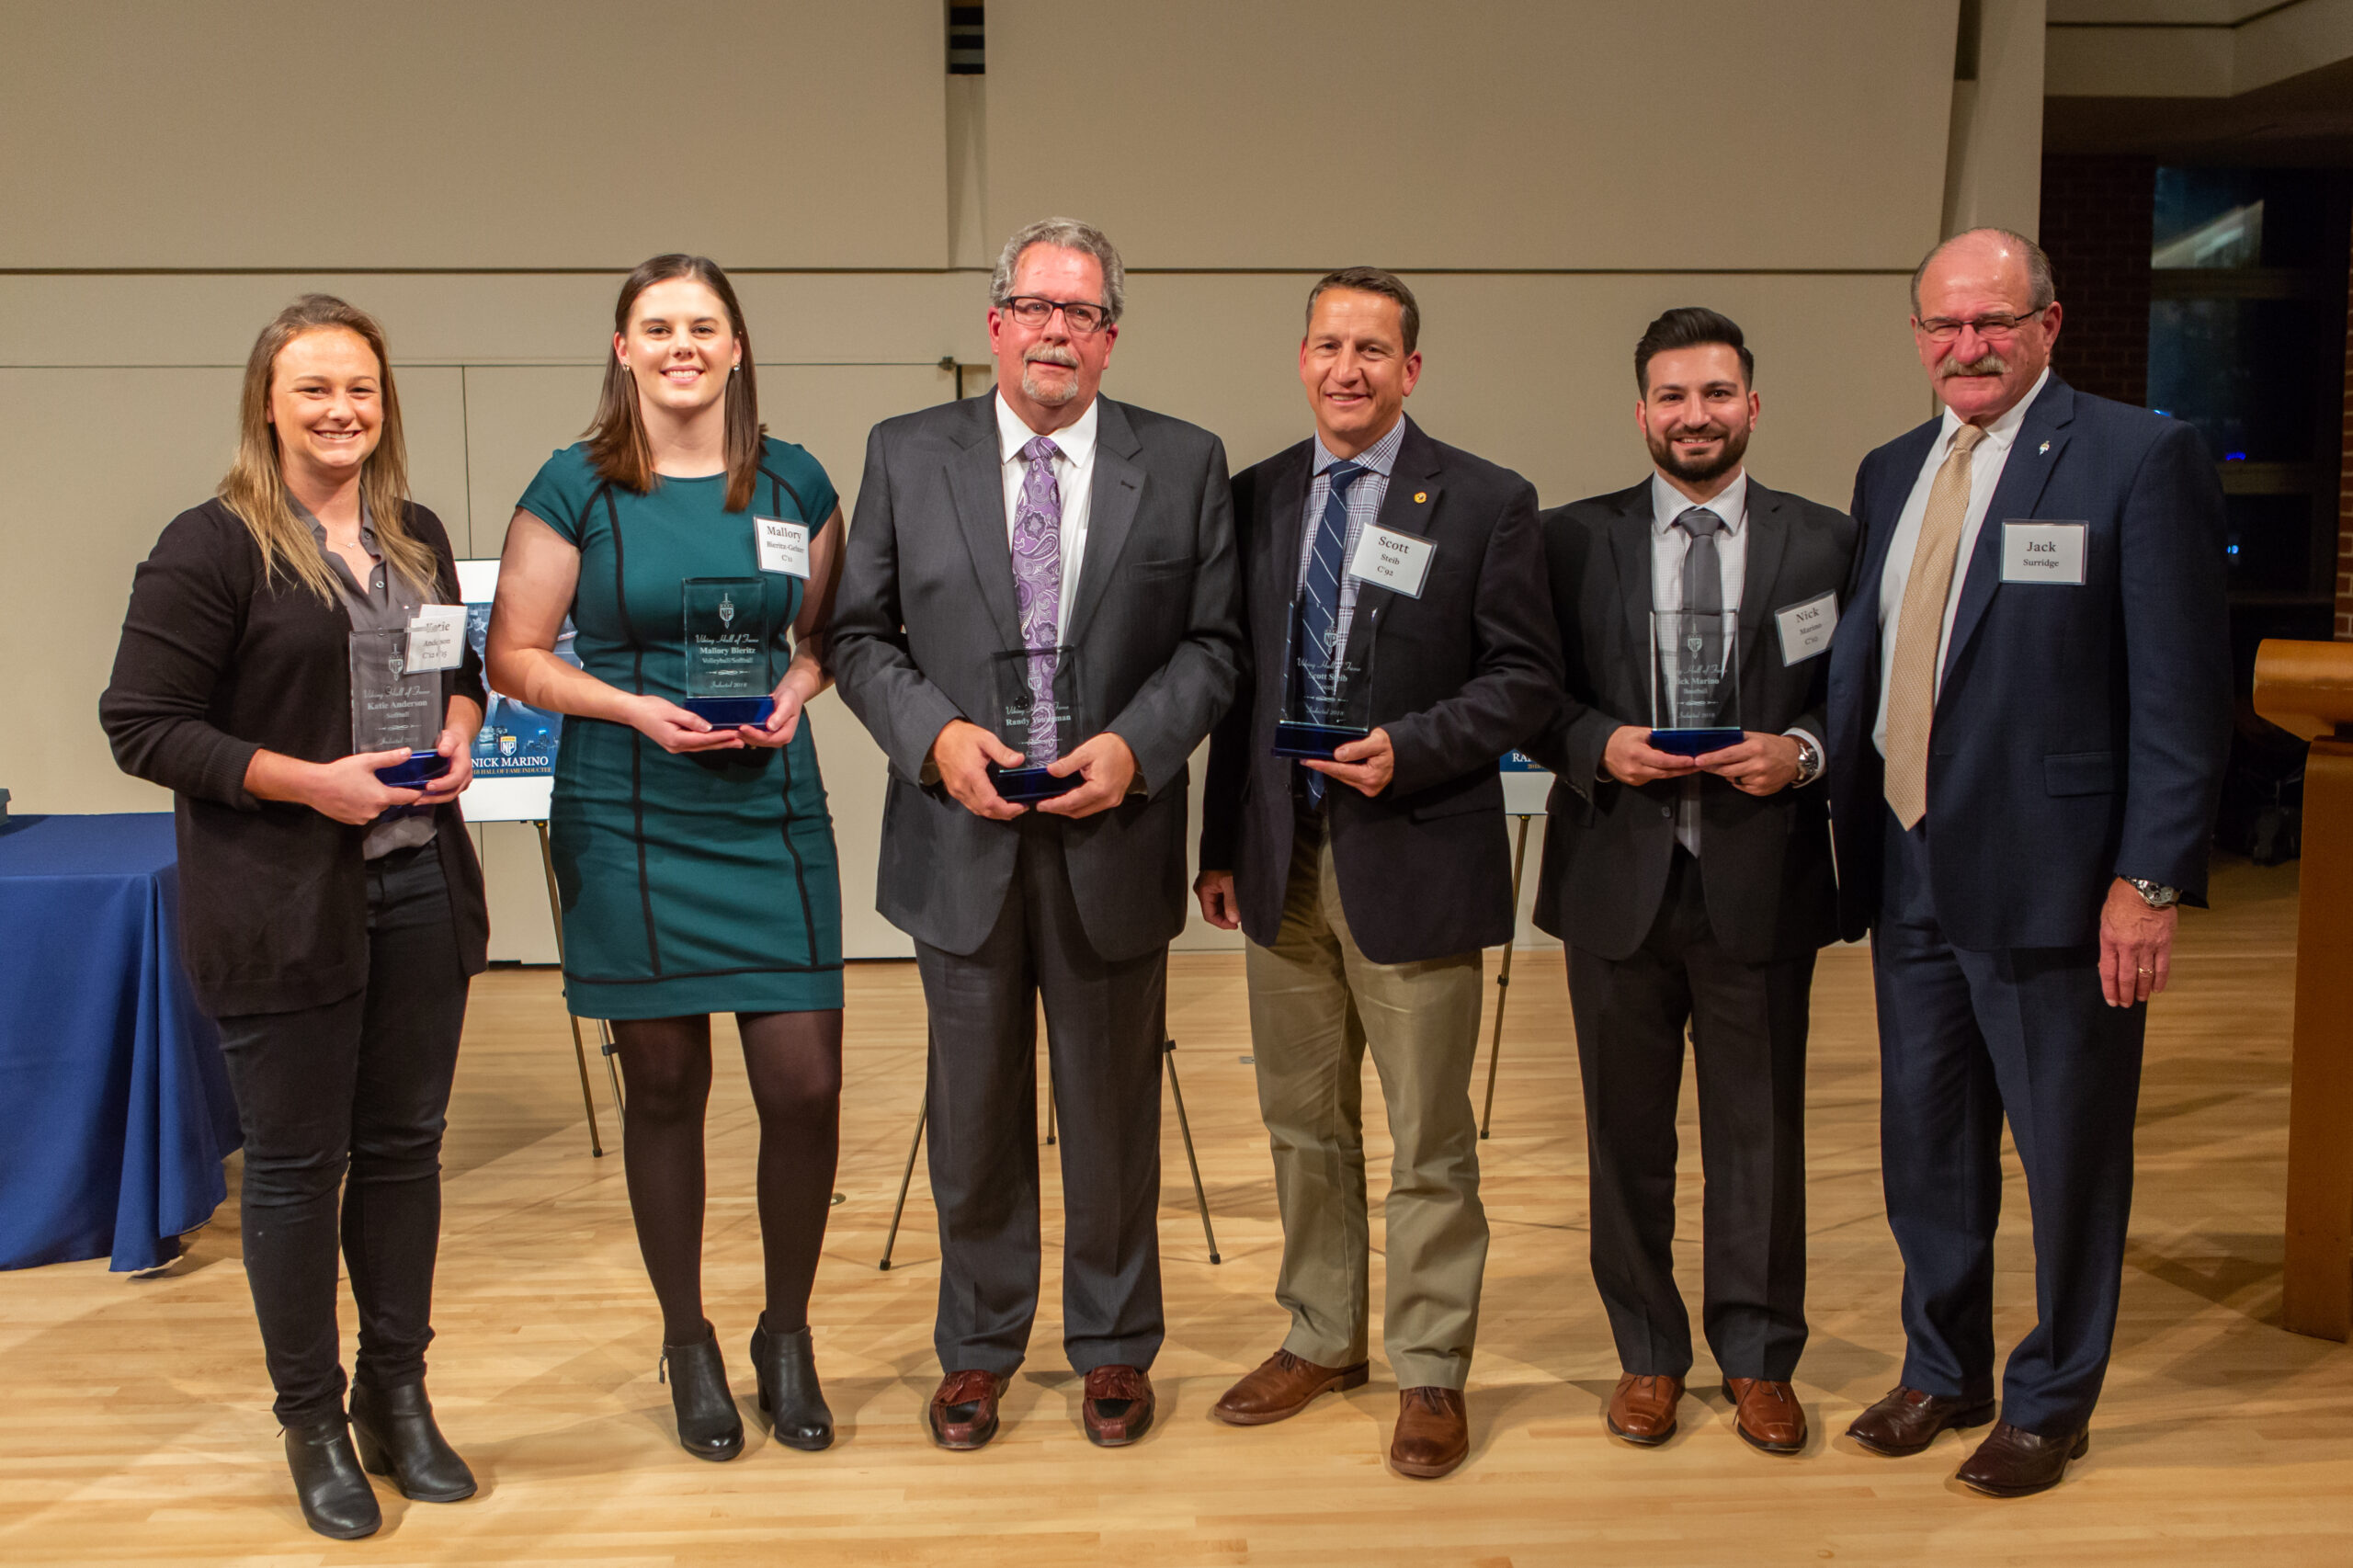 Katie Anderson C’12 G’15, Mallory Bieritz-Gelzer C’12, Randy Youngman C’77, Scott Steib C’93, and Nick Marino C’10 are inducted into the Viking Hall of Fame by Athletic Director Dr. Jack Surridge.